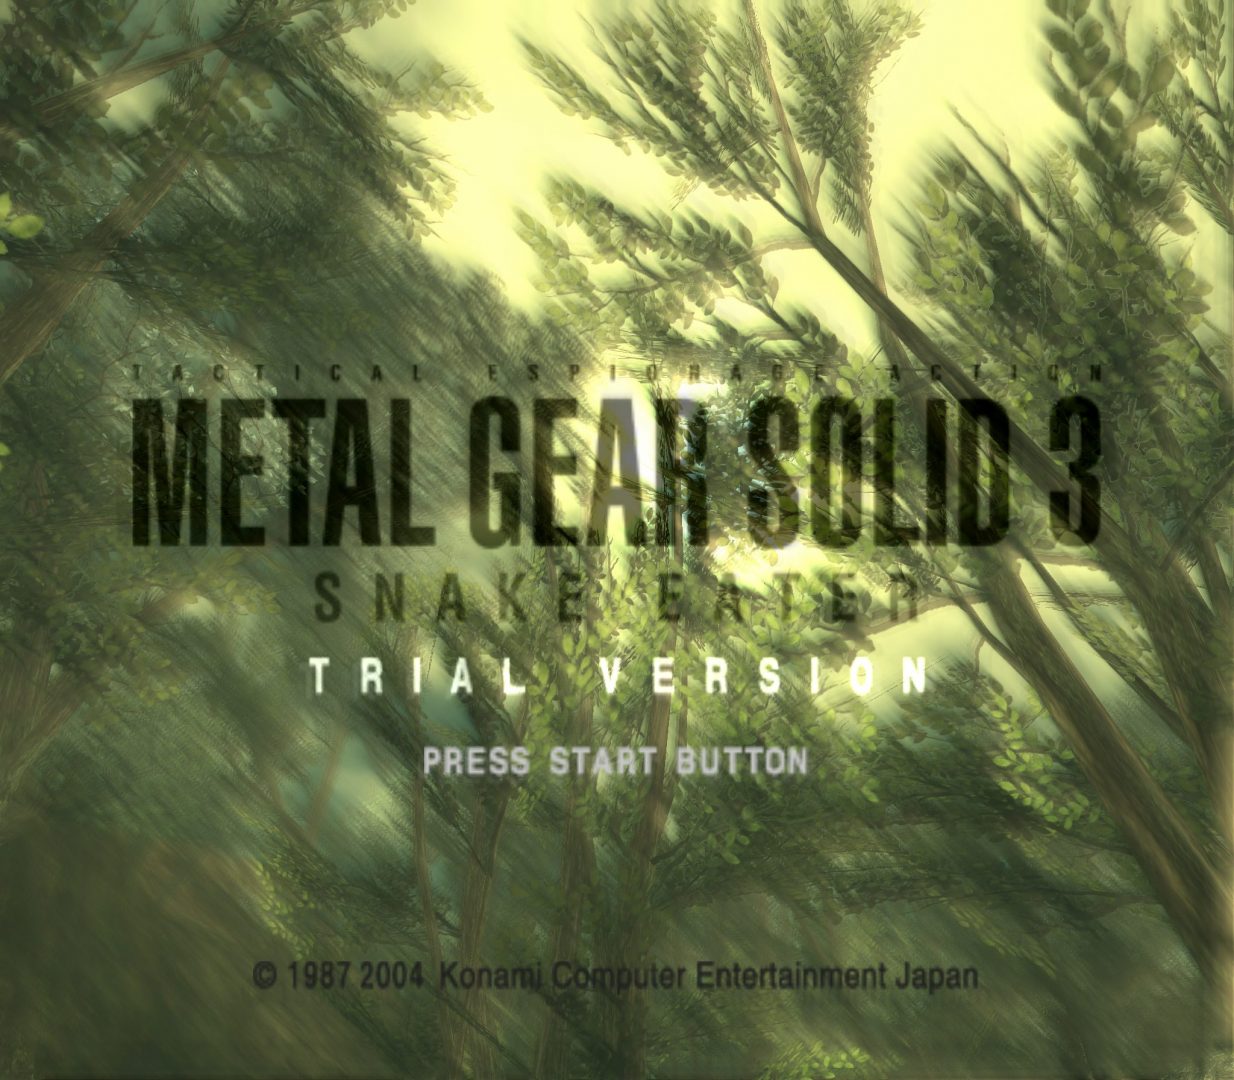 The coverart image of Metal Gear Solid 3: Snake Eater (Trial Version)